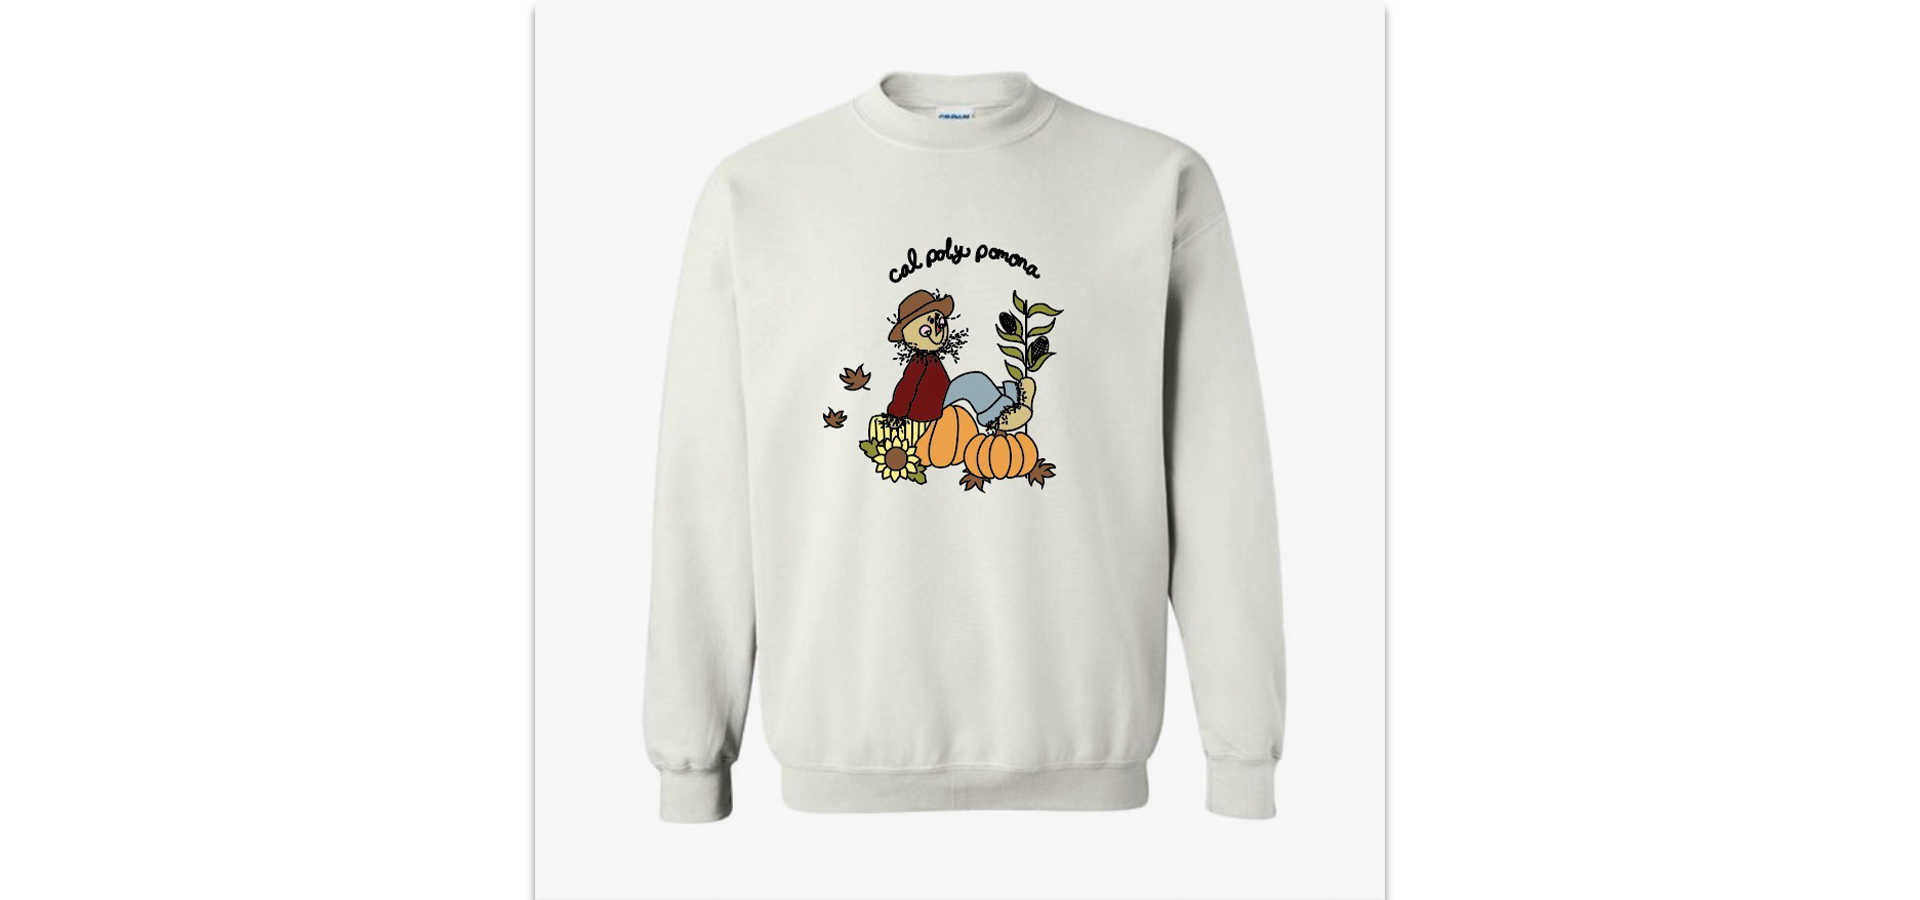 A sweatshirt with a scarecrow, pumpkin, and "Cal Poly Pomona" on it